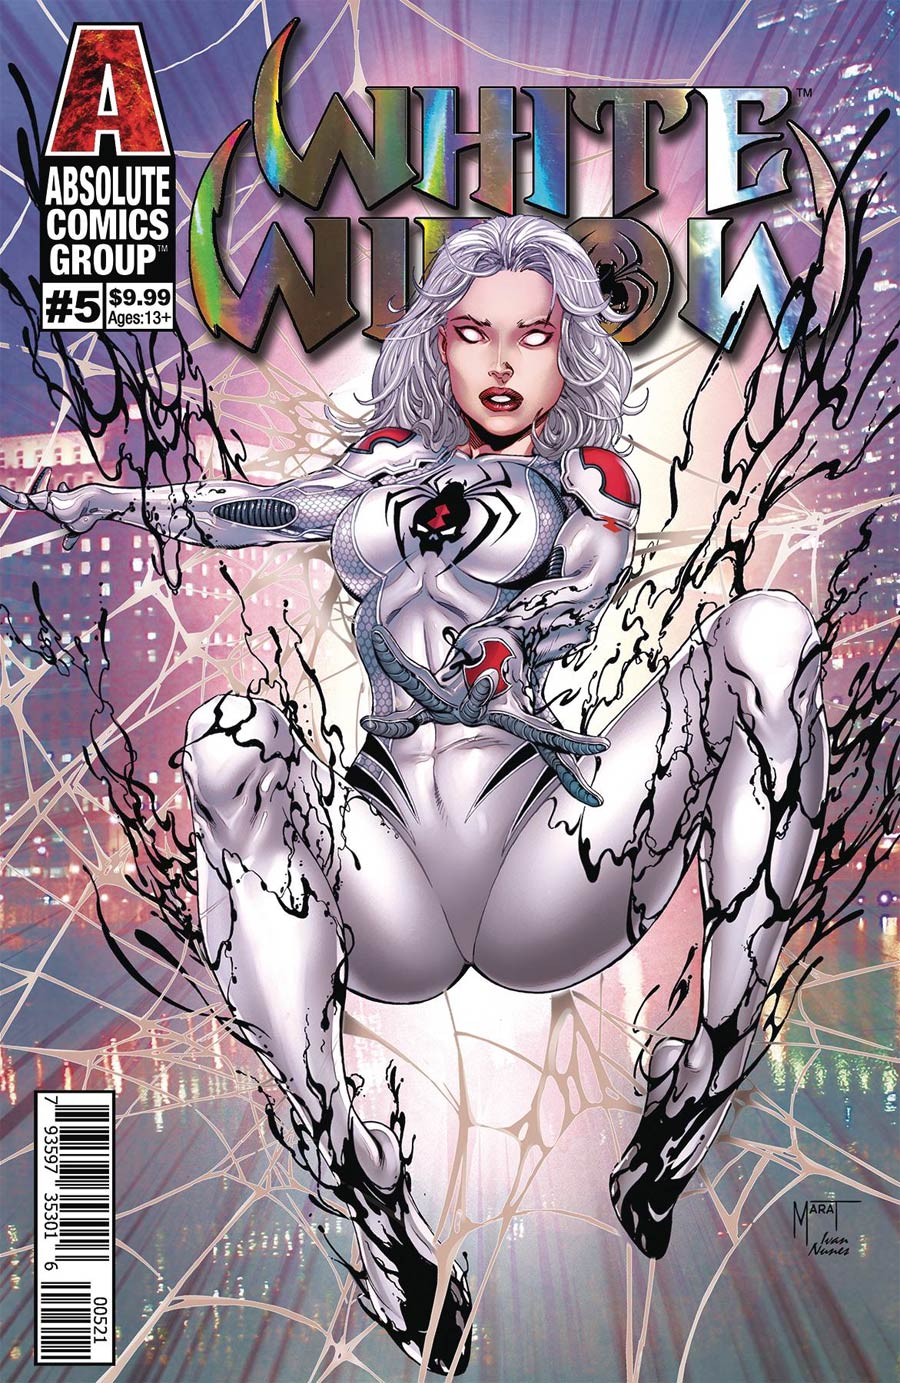 White Widow (Absolute Comics Group) #5 Cover B Variant Marat Mychaels Silver Holographic Foil Logo Cover